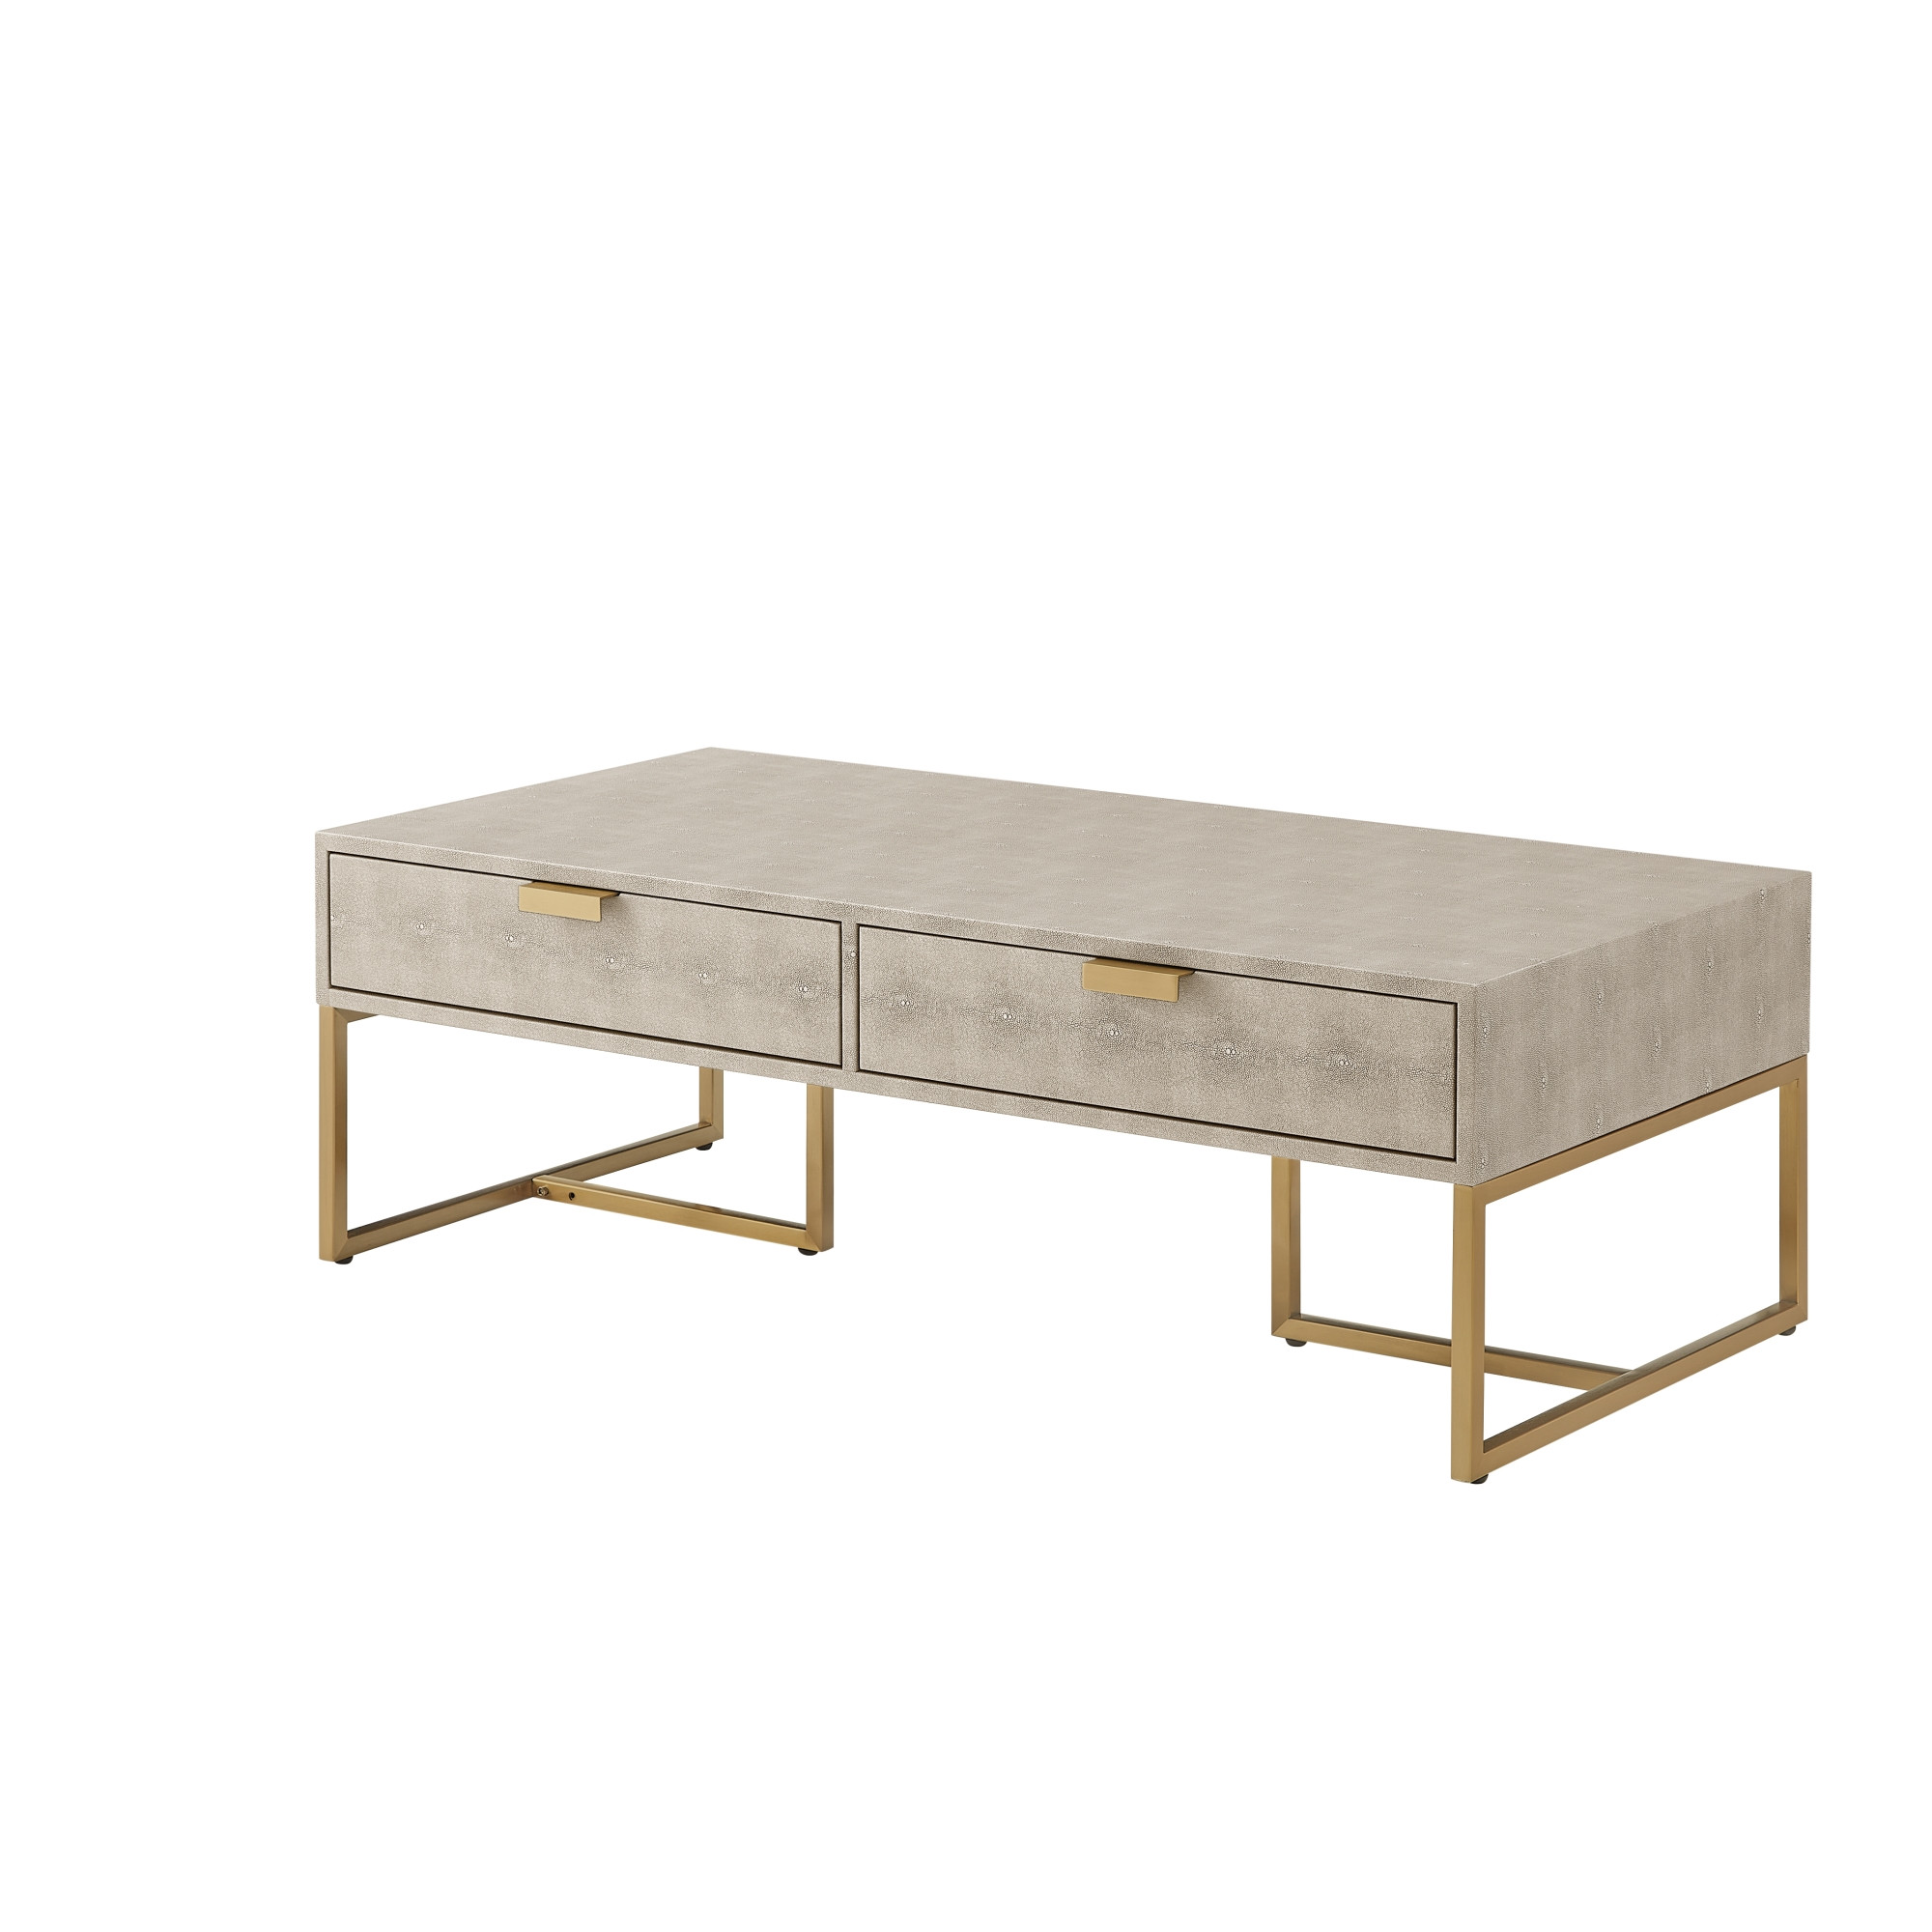 46" Cream And Gold Stainless Steel Coffee Table With Two Drawers-543874-1